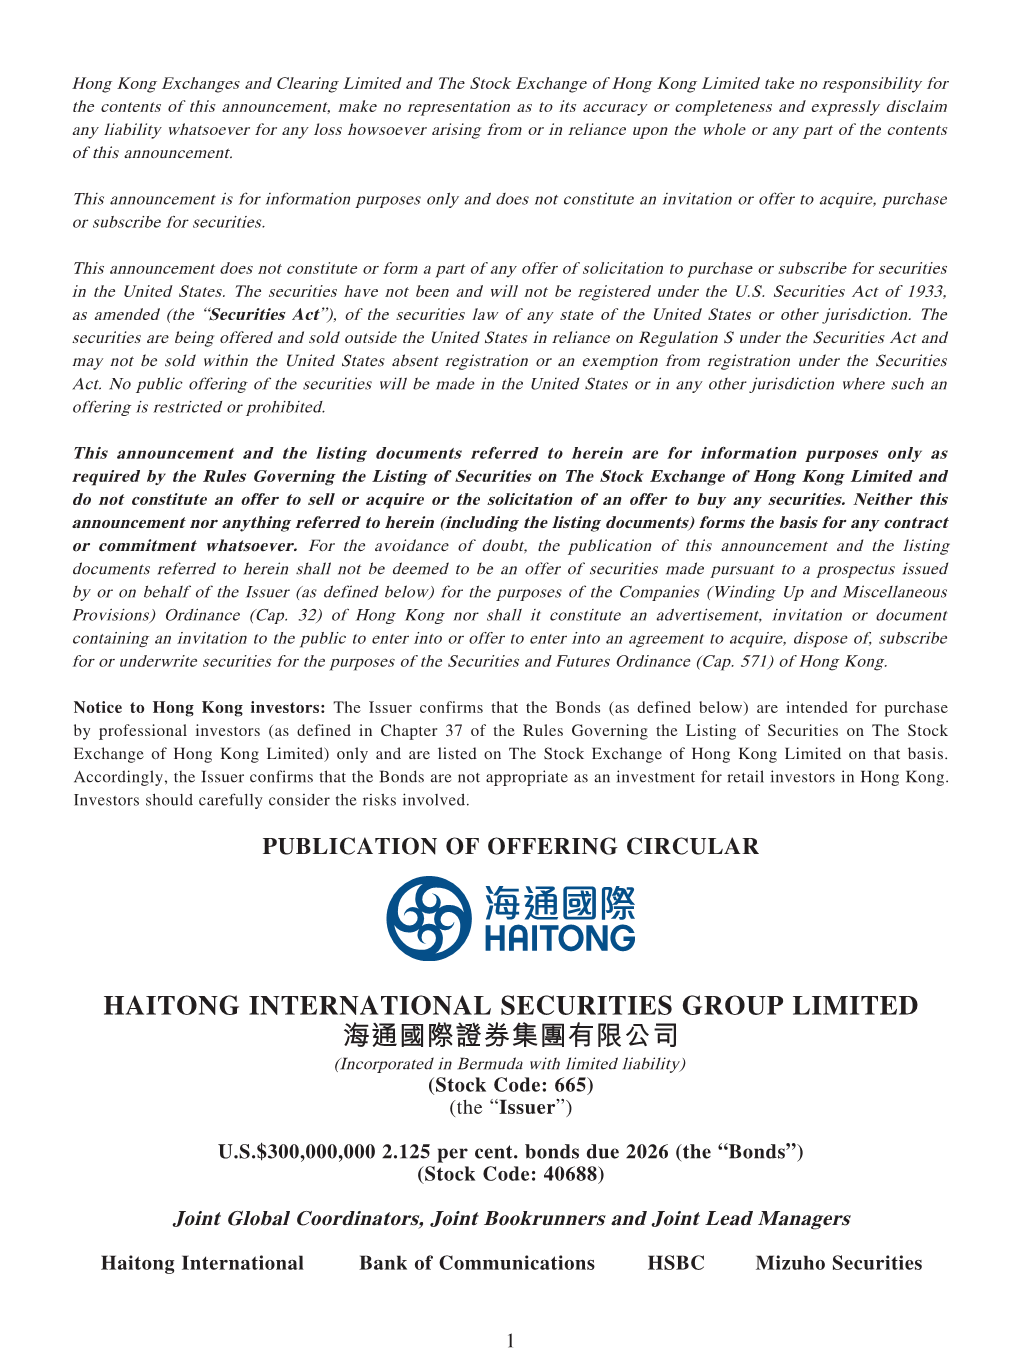 HAITONG INTERNATIONAL SECURITIES GROUP LIMITED 海通國際證券集團有限公司 (Incorporated in Bermuda with Limited Liability) (Stock Code: 665) (The “Issuer”)